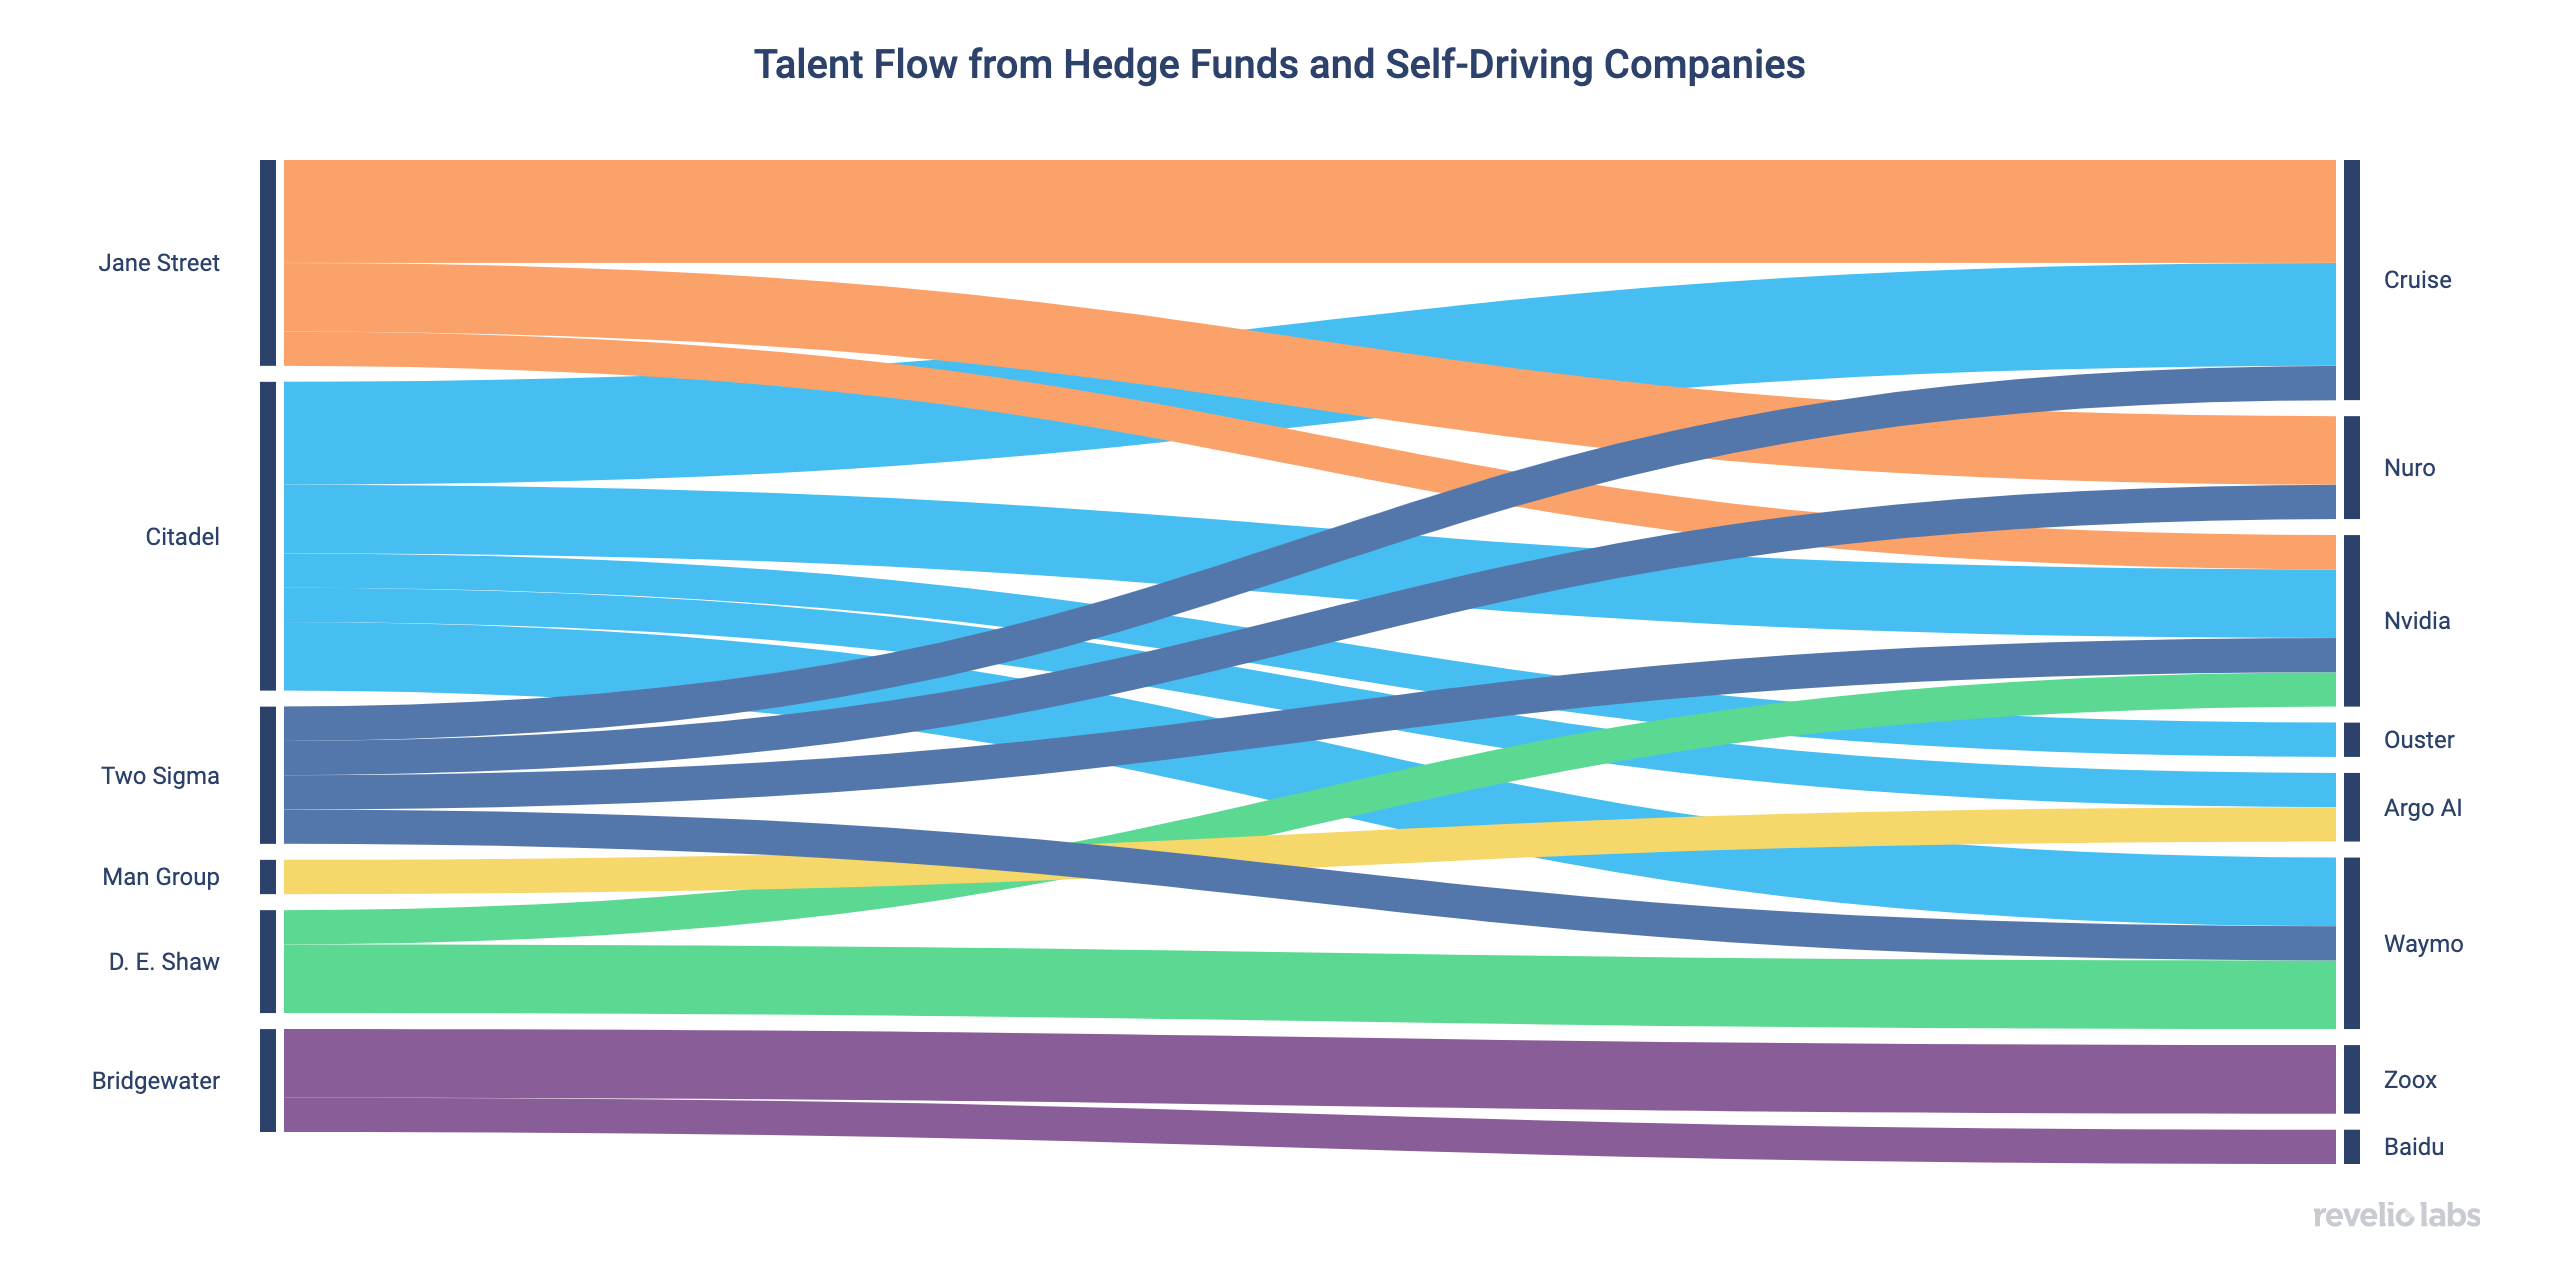 Talent Flow from Hedge Funds and Self-Driving Companies